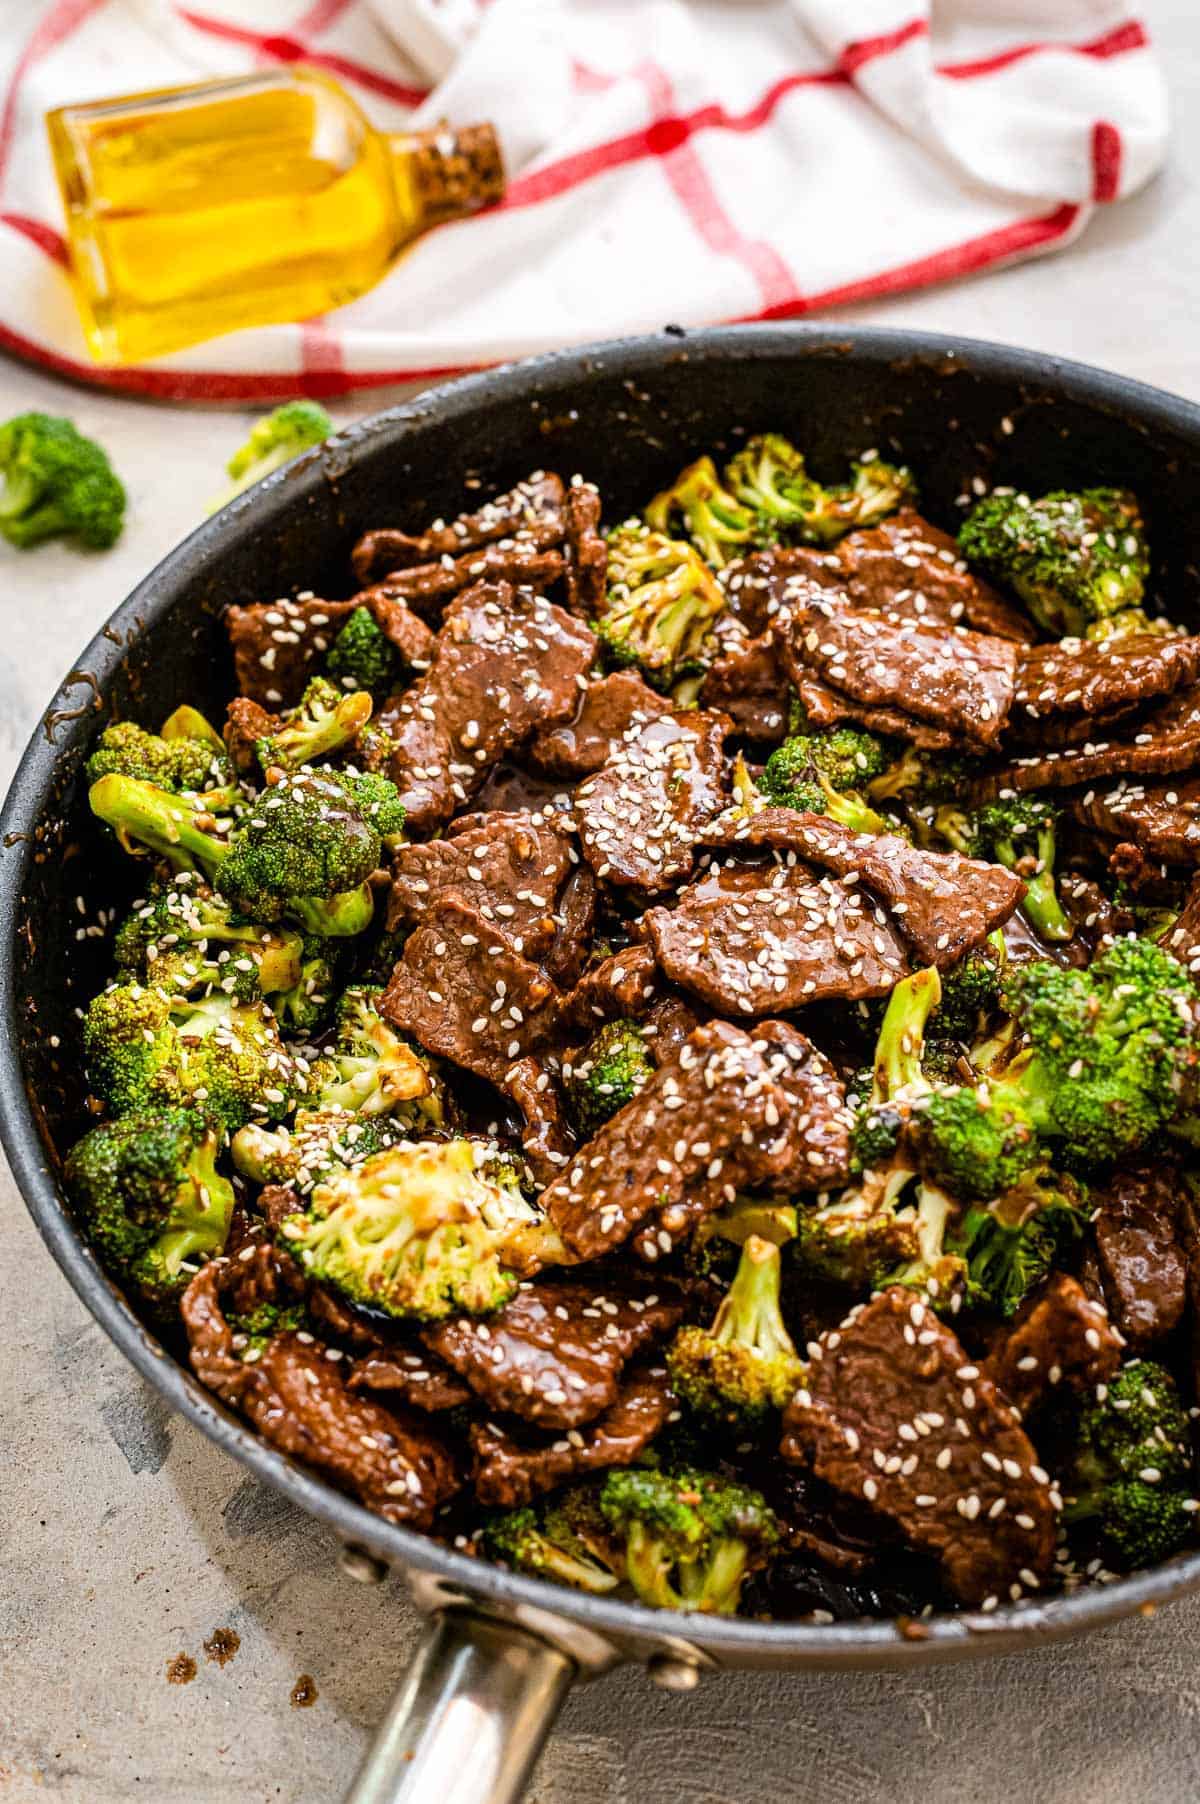 Skillet with prepared beef and broccoli